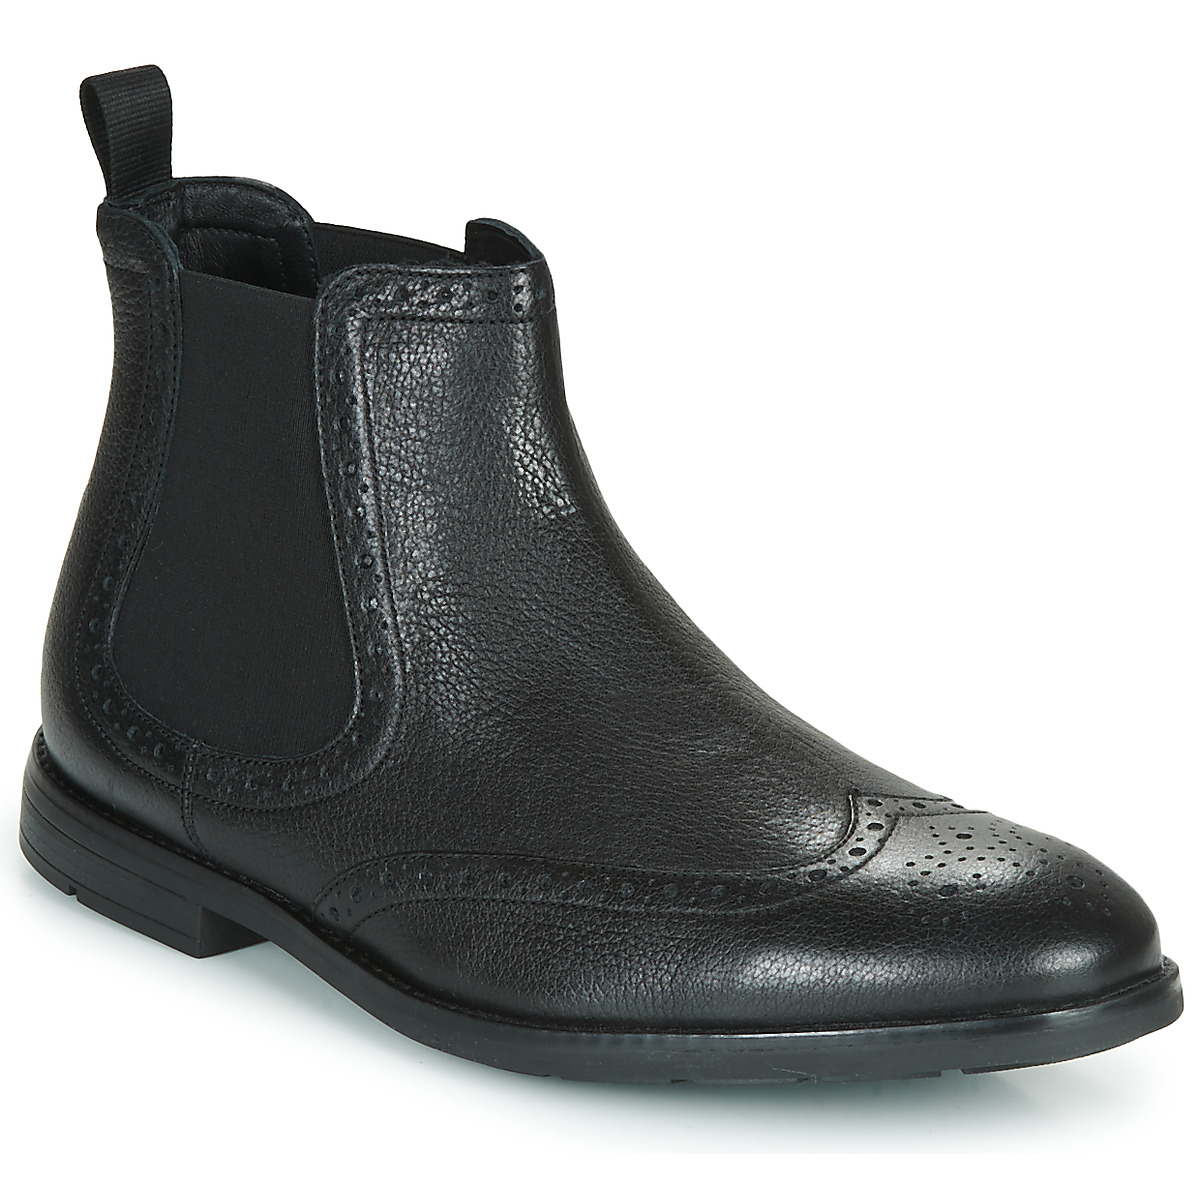 Chaussures Homme Uomo Boots Clarks RONNIE TOP Noir